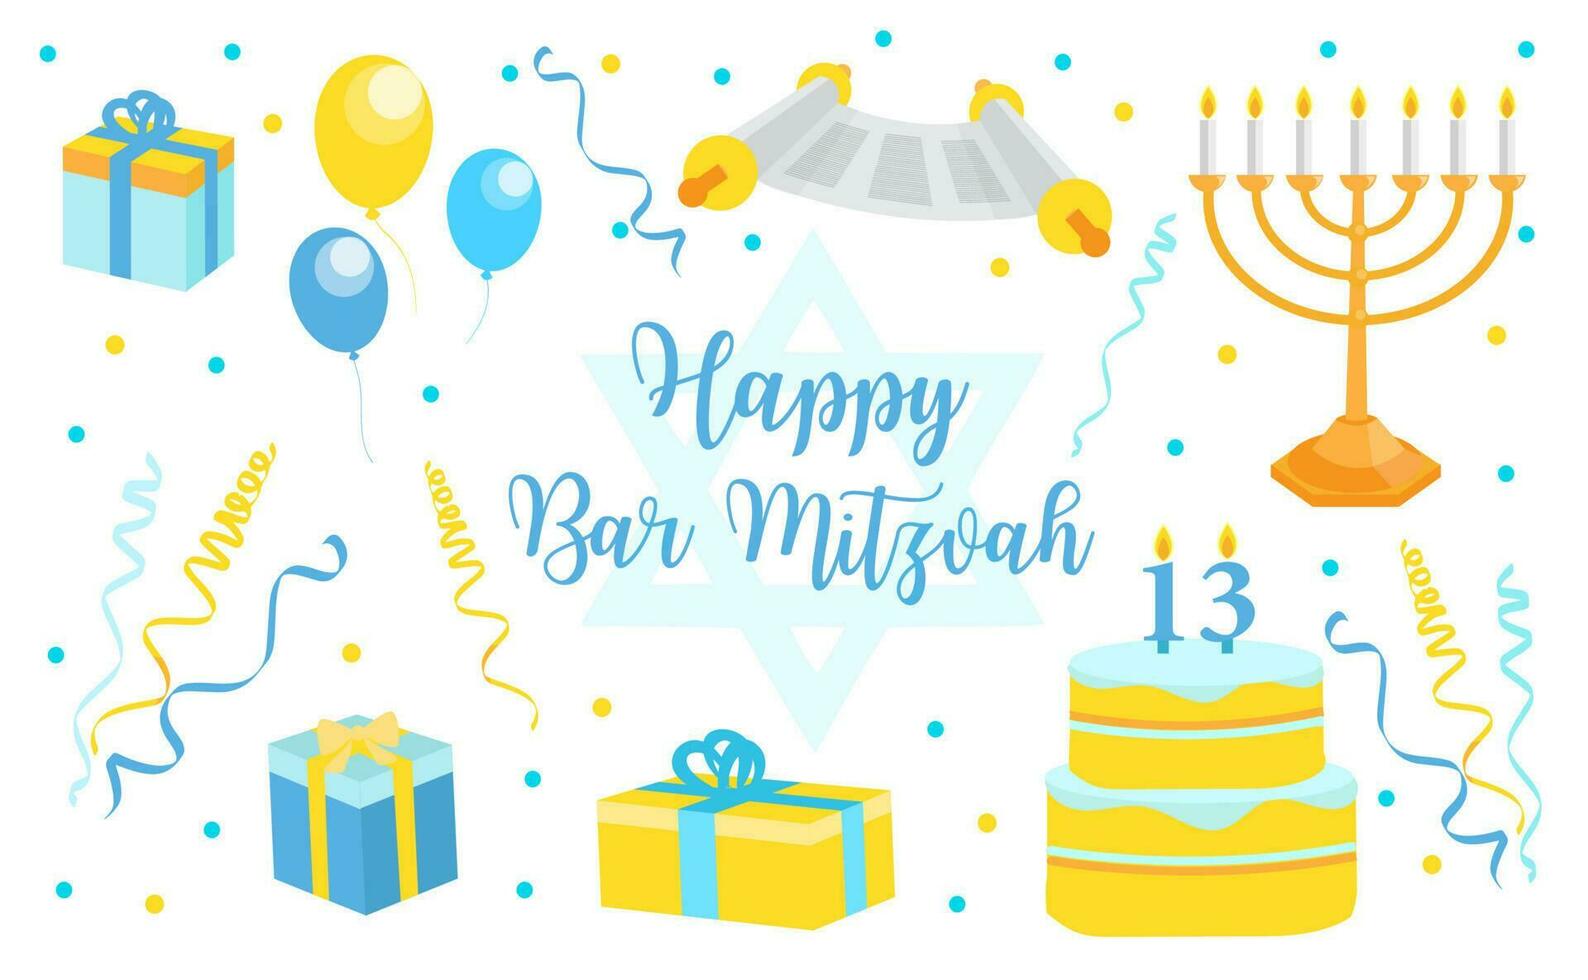 Bar mitzvah set of flat style icons. Collection of elements for congratulation or invitation card, banner, with menorah, Star of David isolated on white background. vector